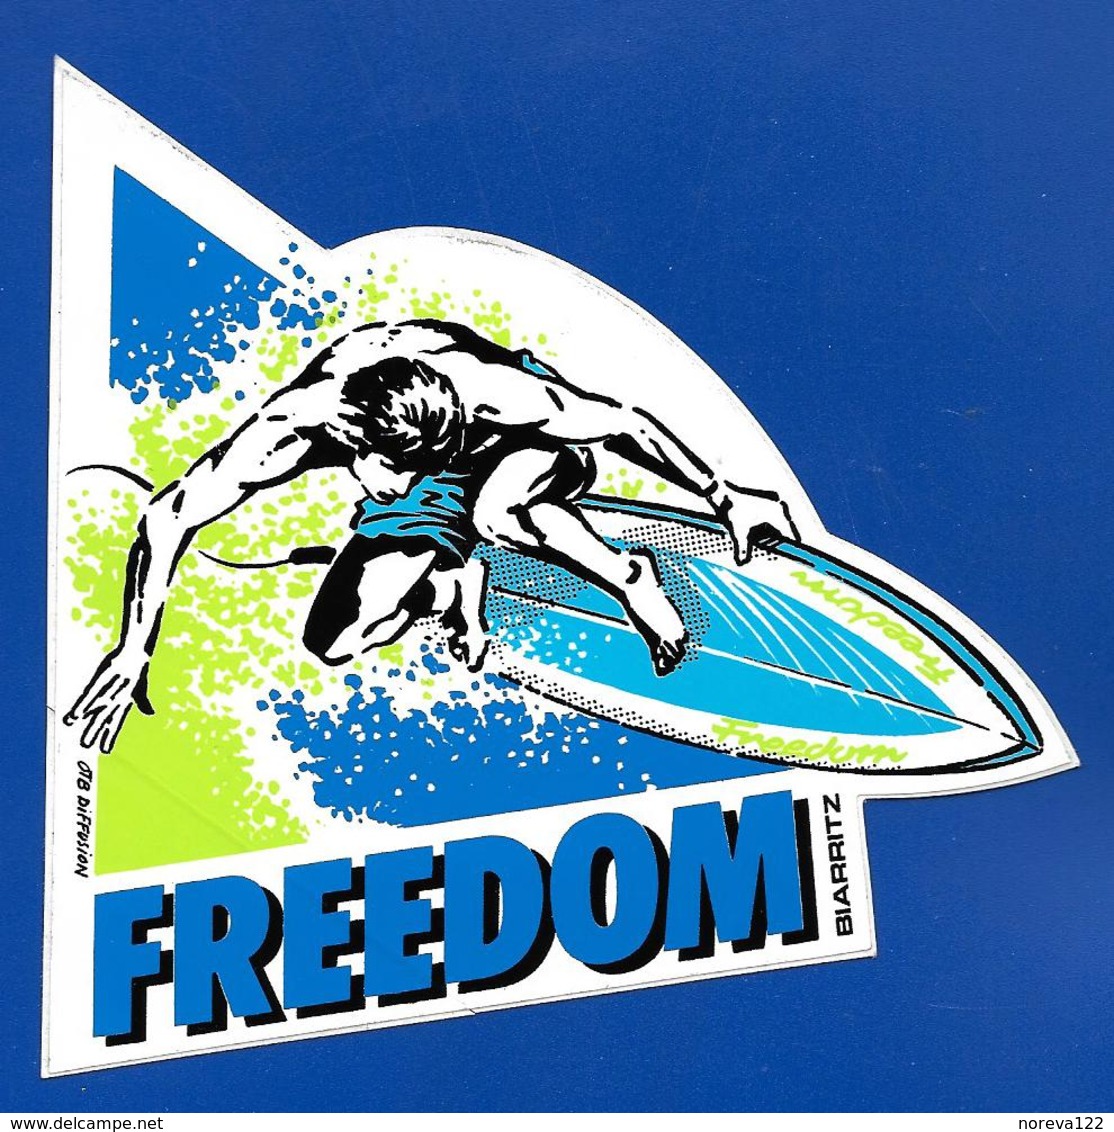 A.C. Planche FREEDOM Biarritz - Stickers